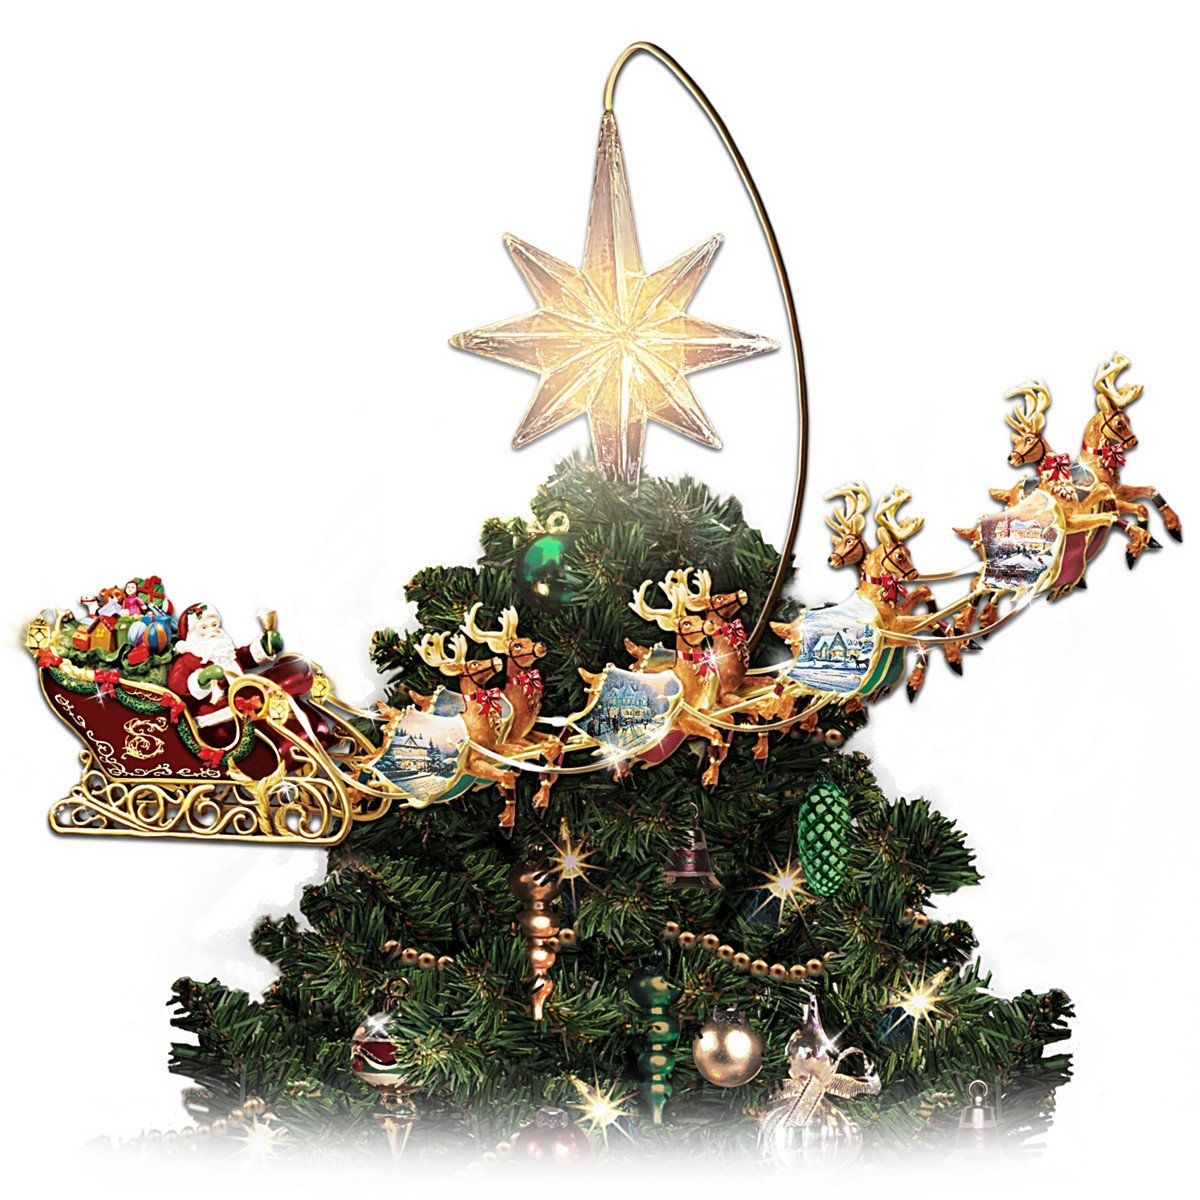 Golden NUOBESTY Christmas Tree Topper Star Glittering Christmas Tree Decoration Ornaments